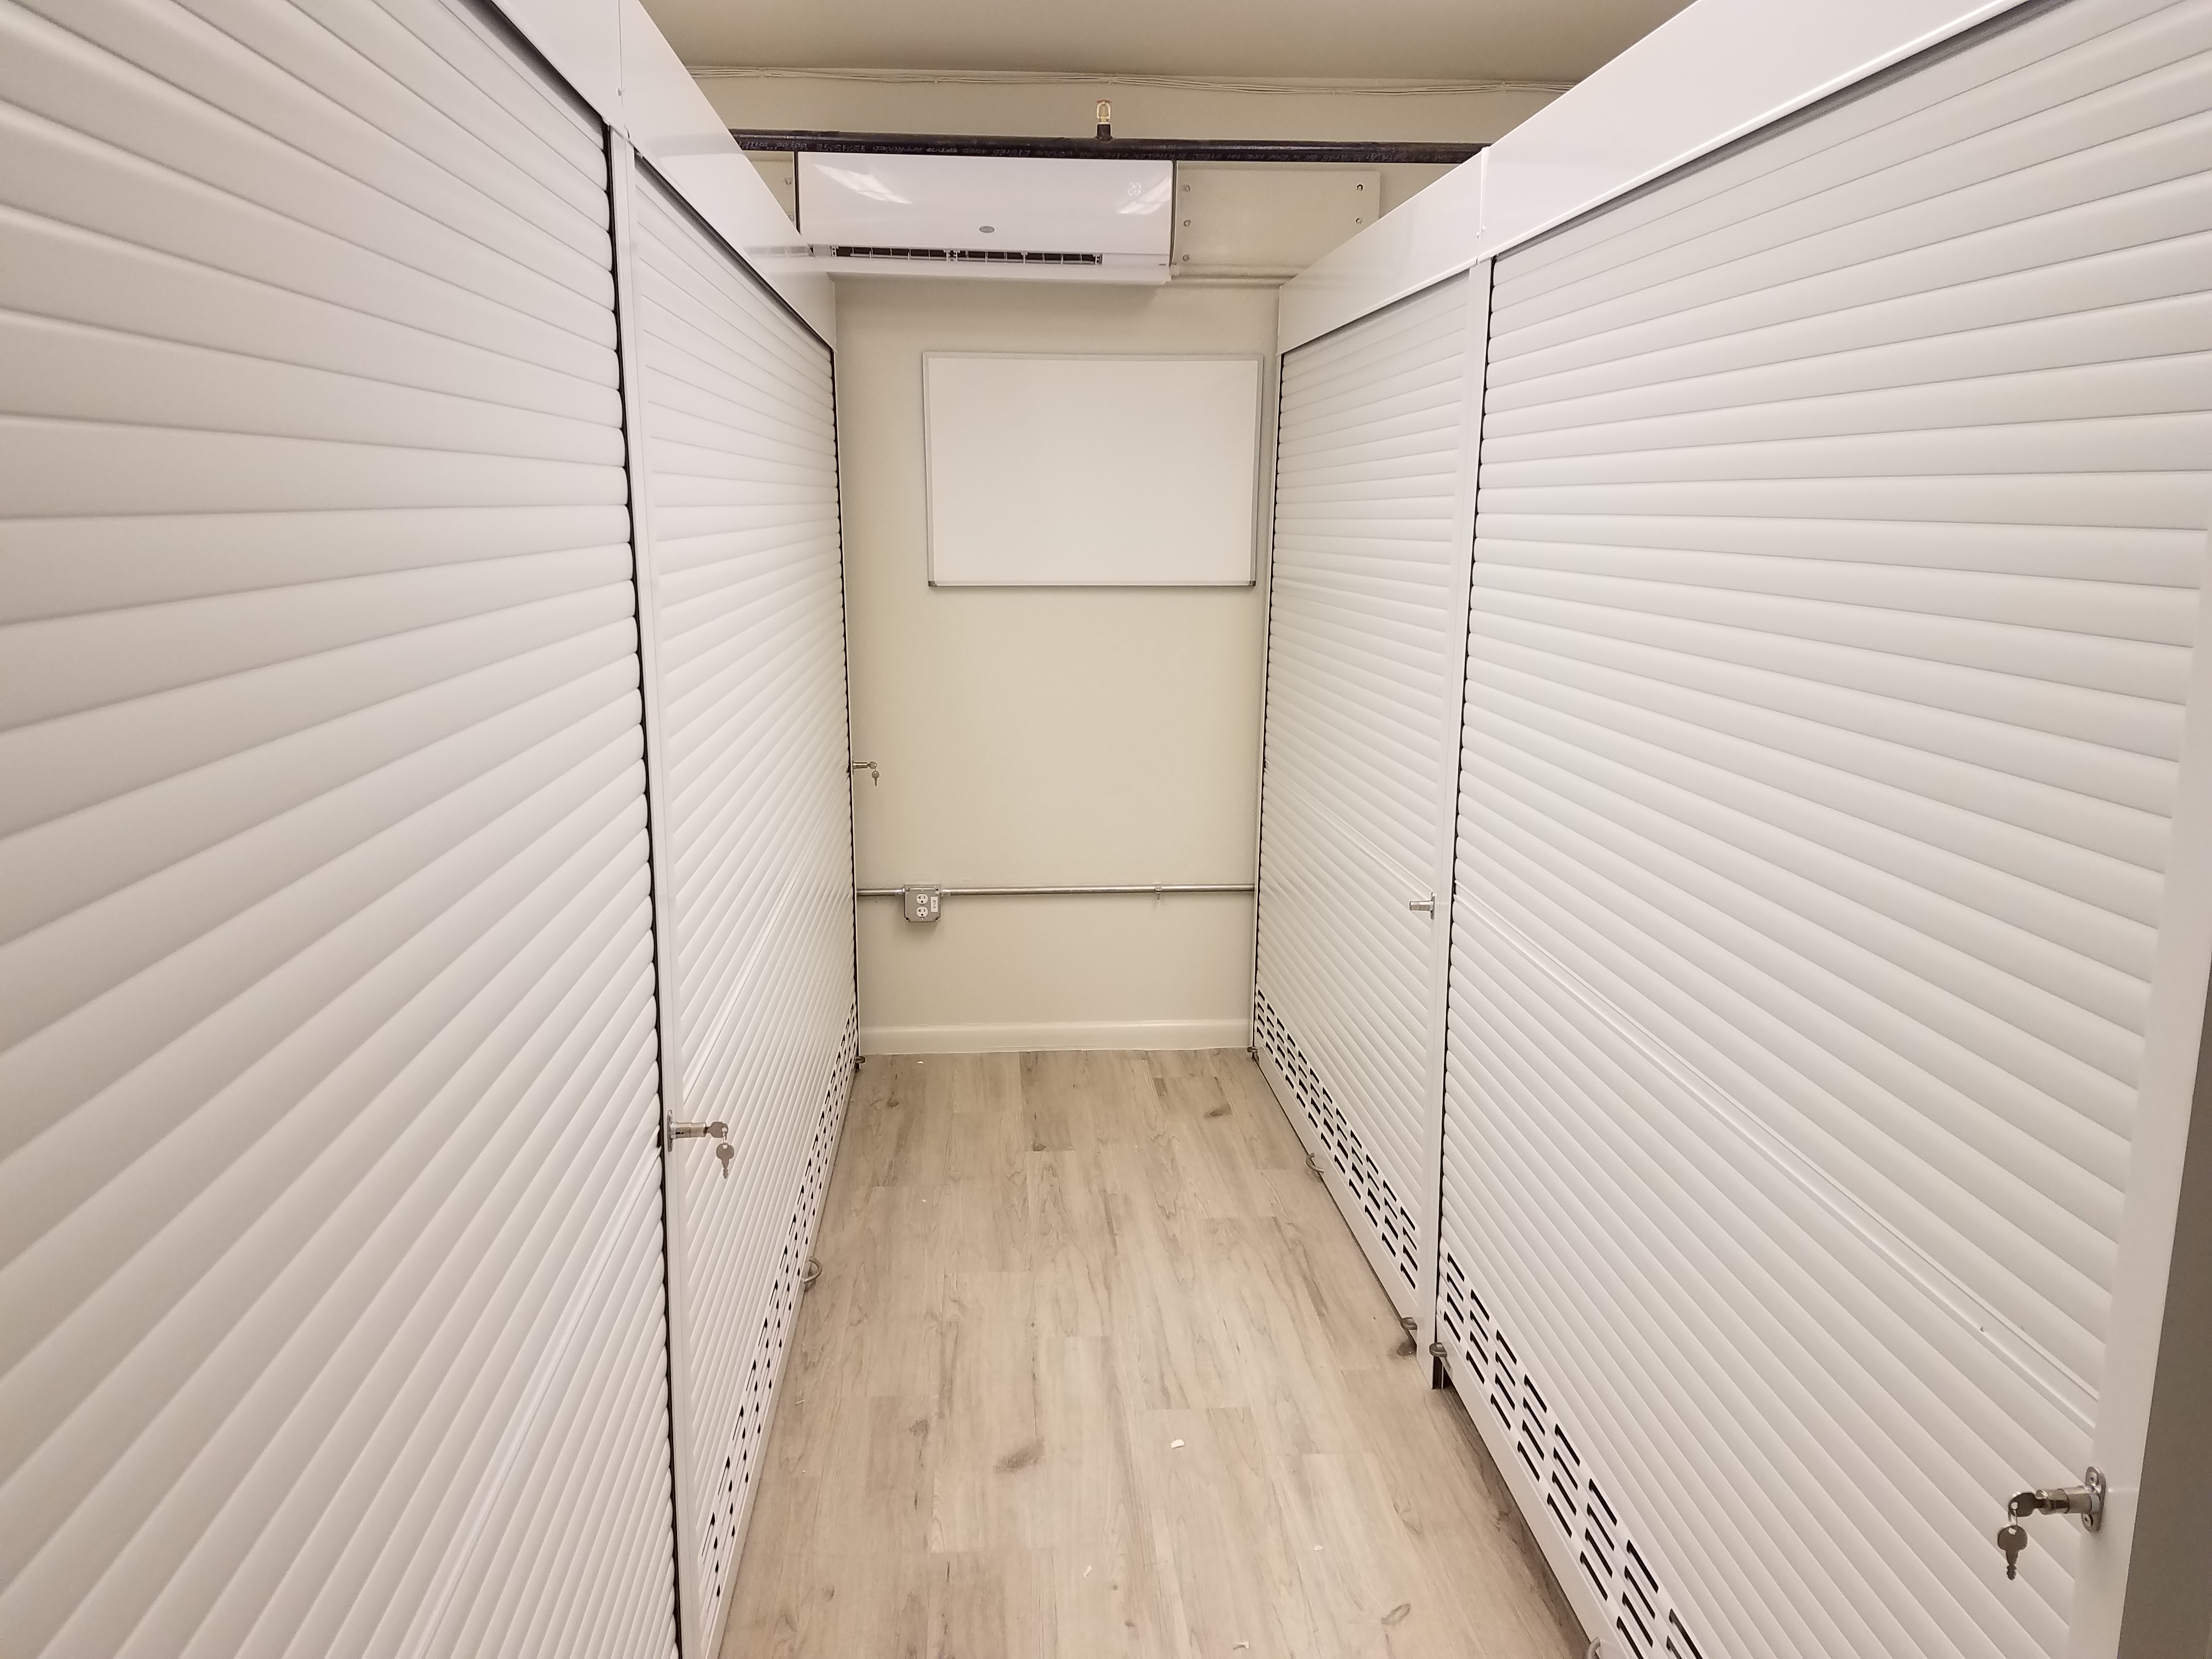 Rolling Security Shutters and Security Doors on Shelving